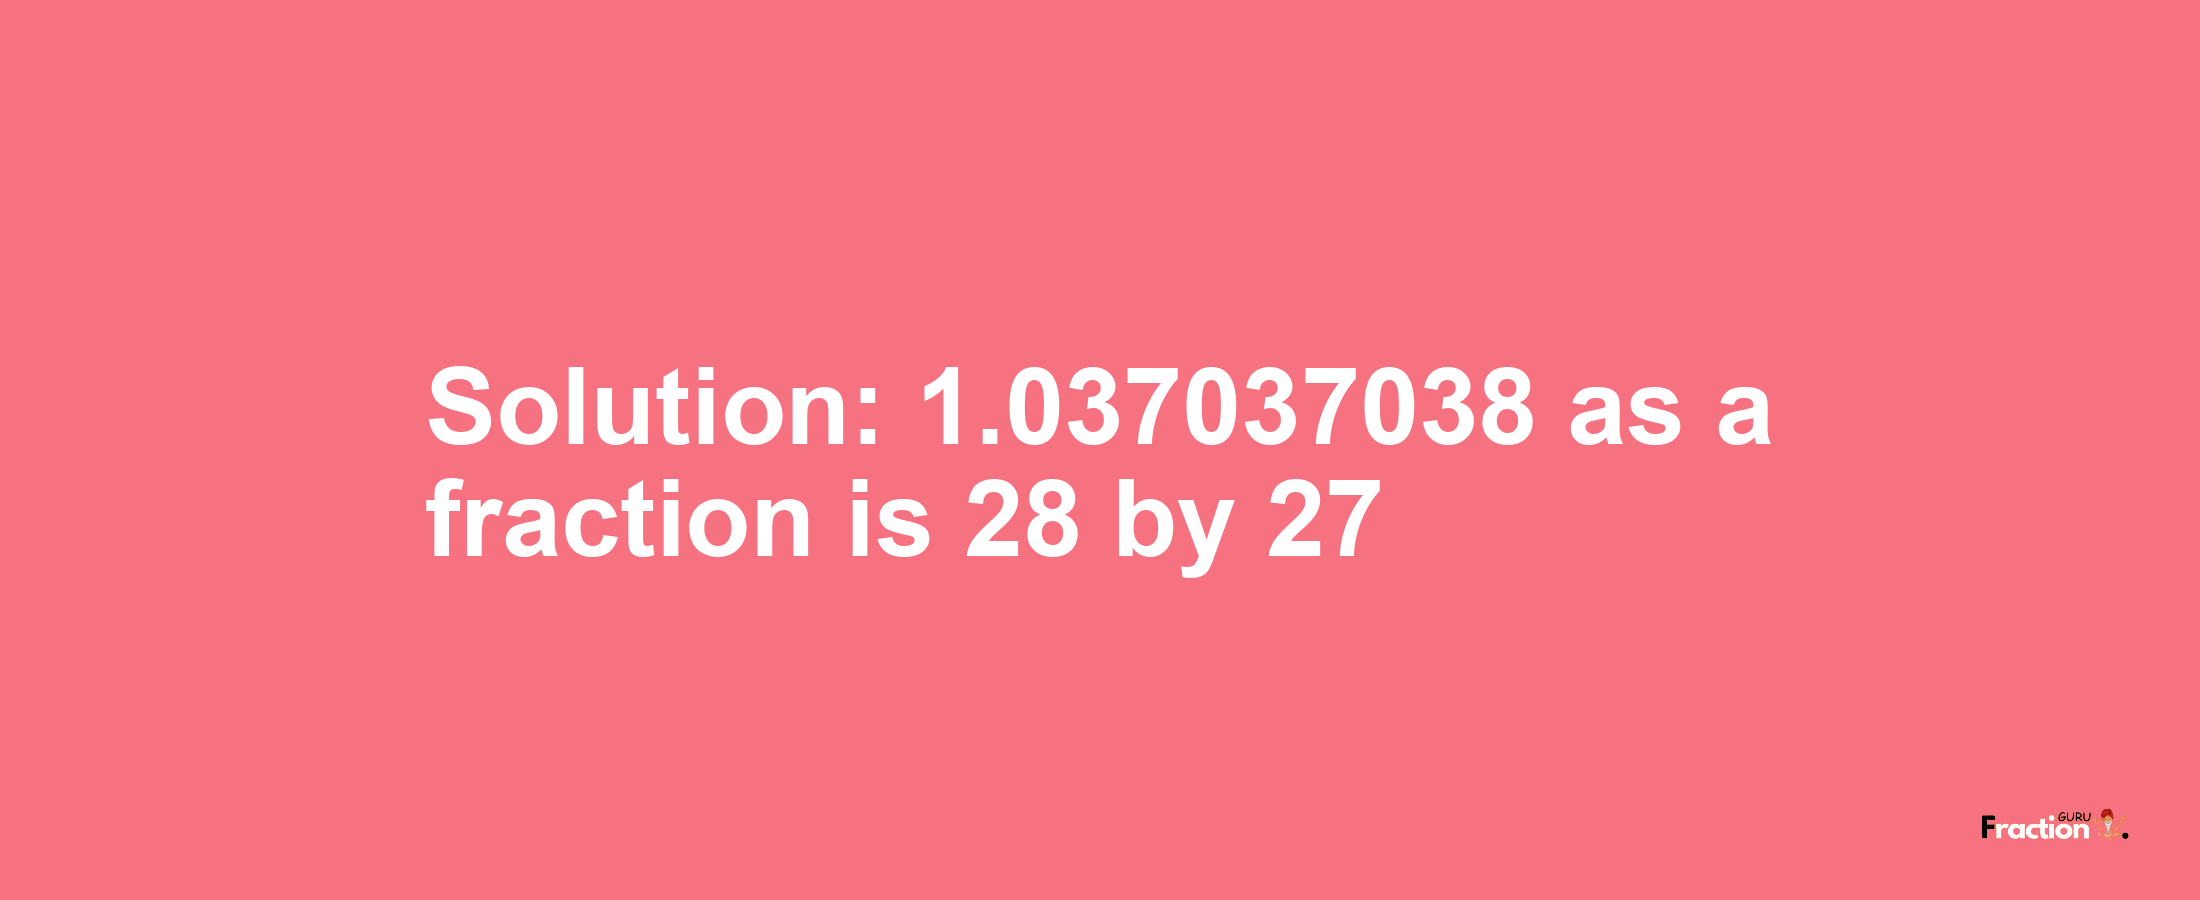 Solution:1.037037038 as a fraction is 28/27